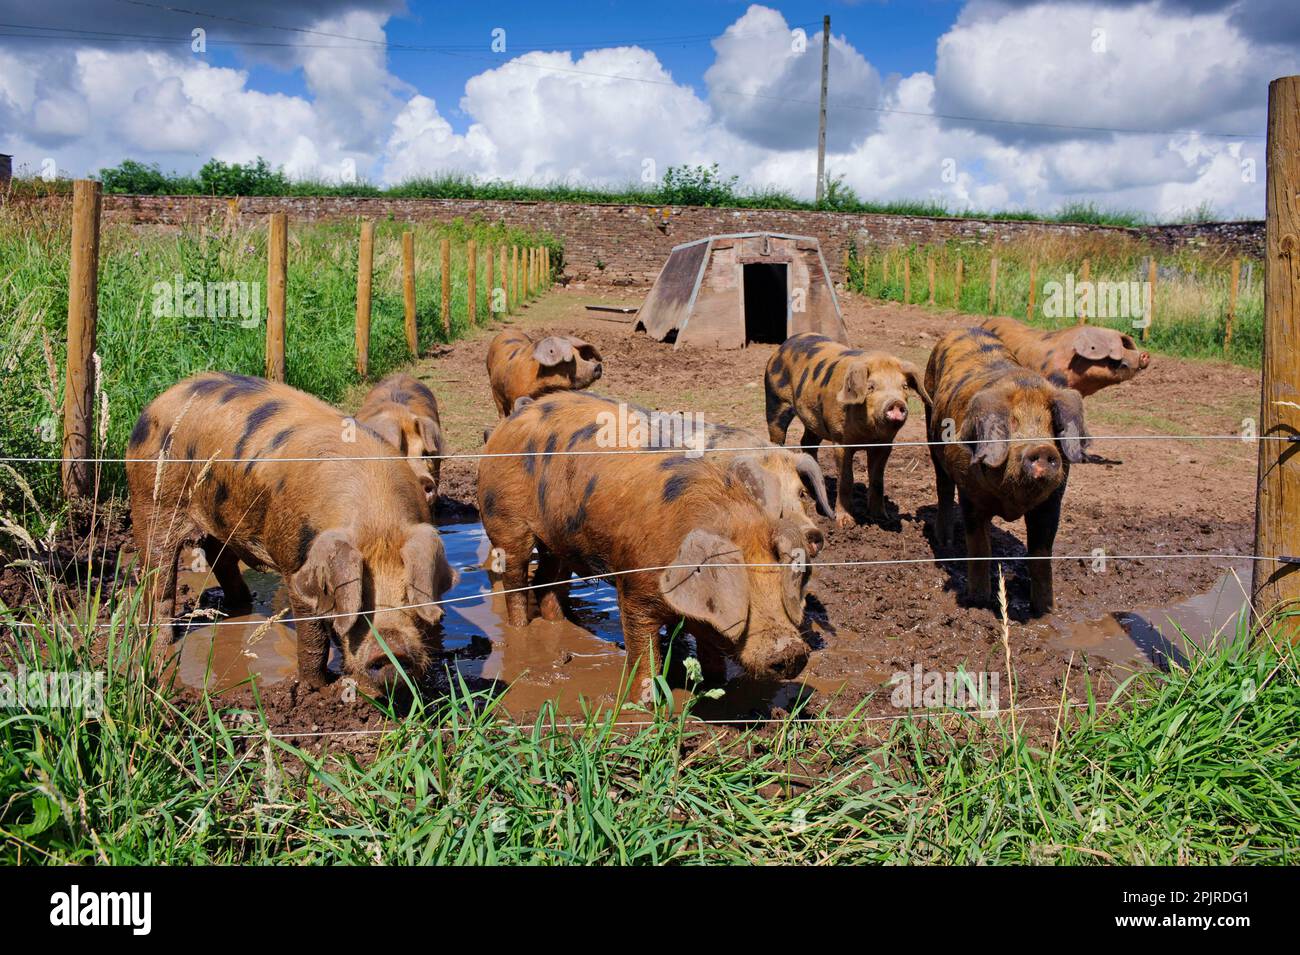 Domestic Pig, Oxford Sandy and Black, weaners in paddock with ark and electric fence, Cumbria, England, United Kingdom Stock Photo